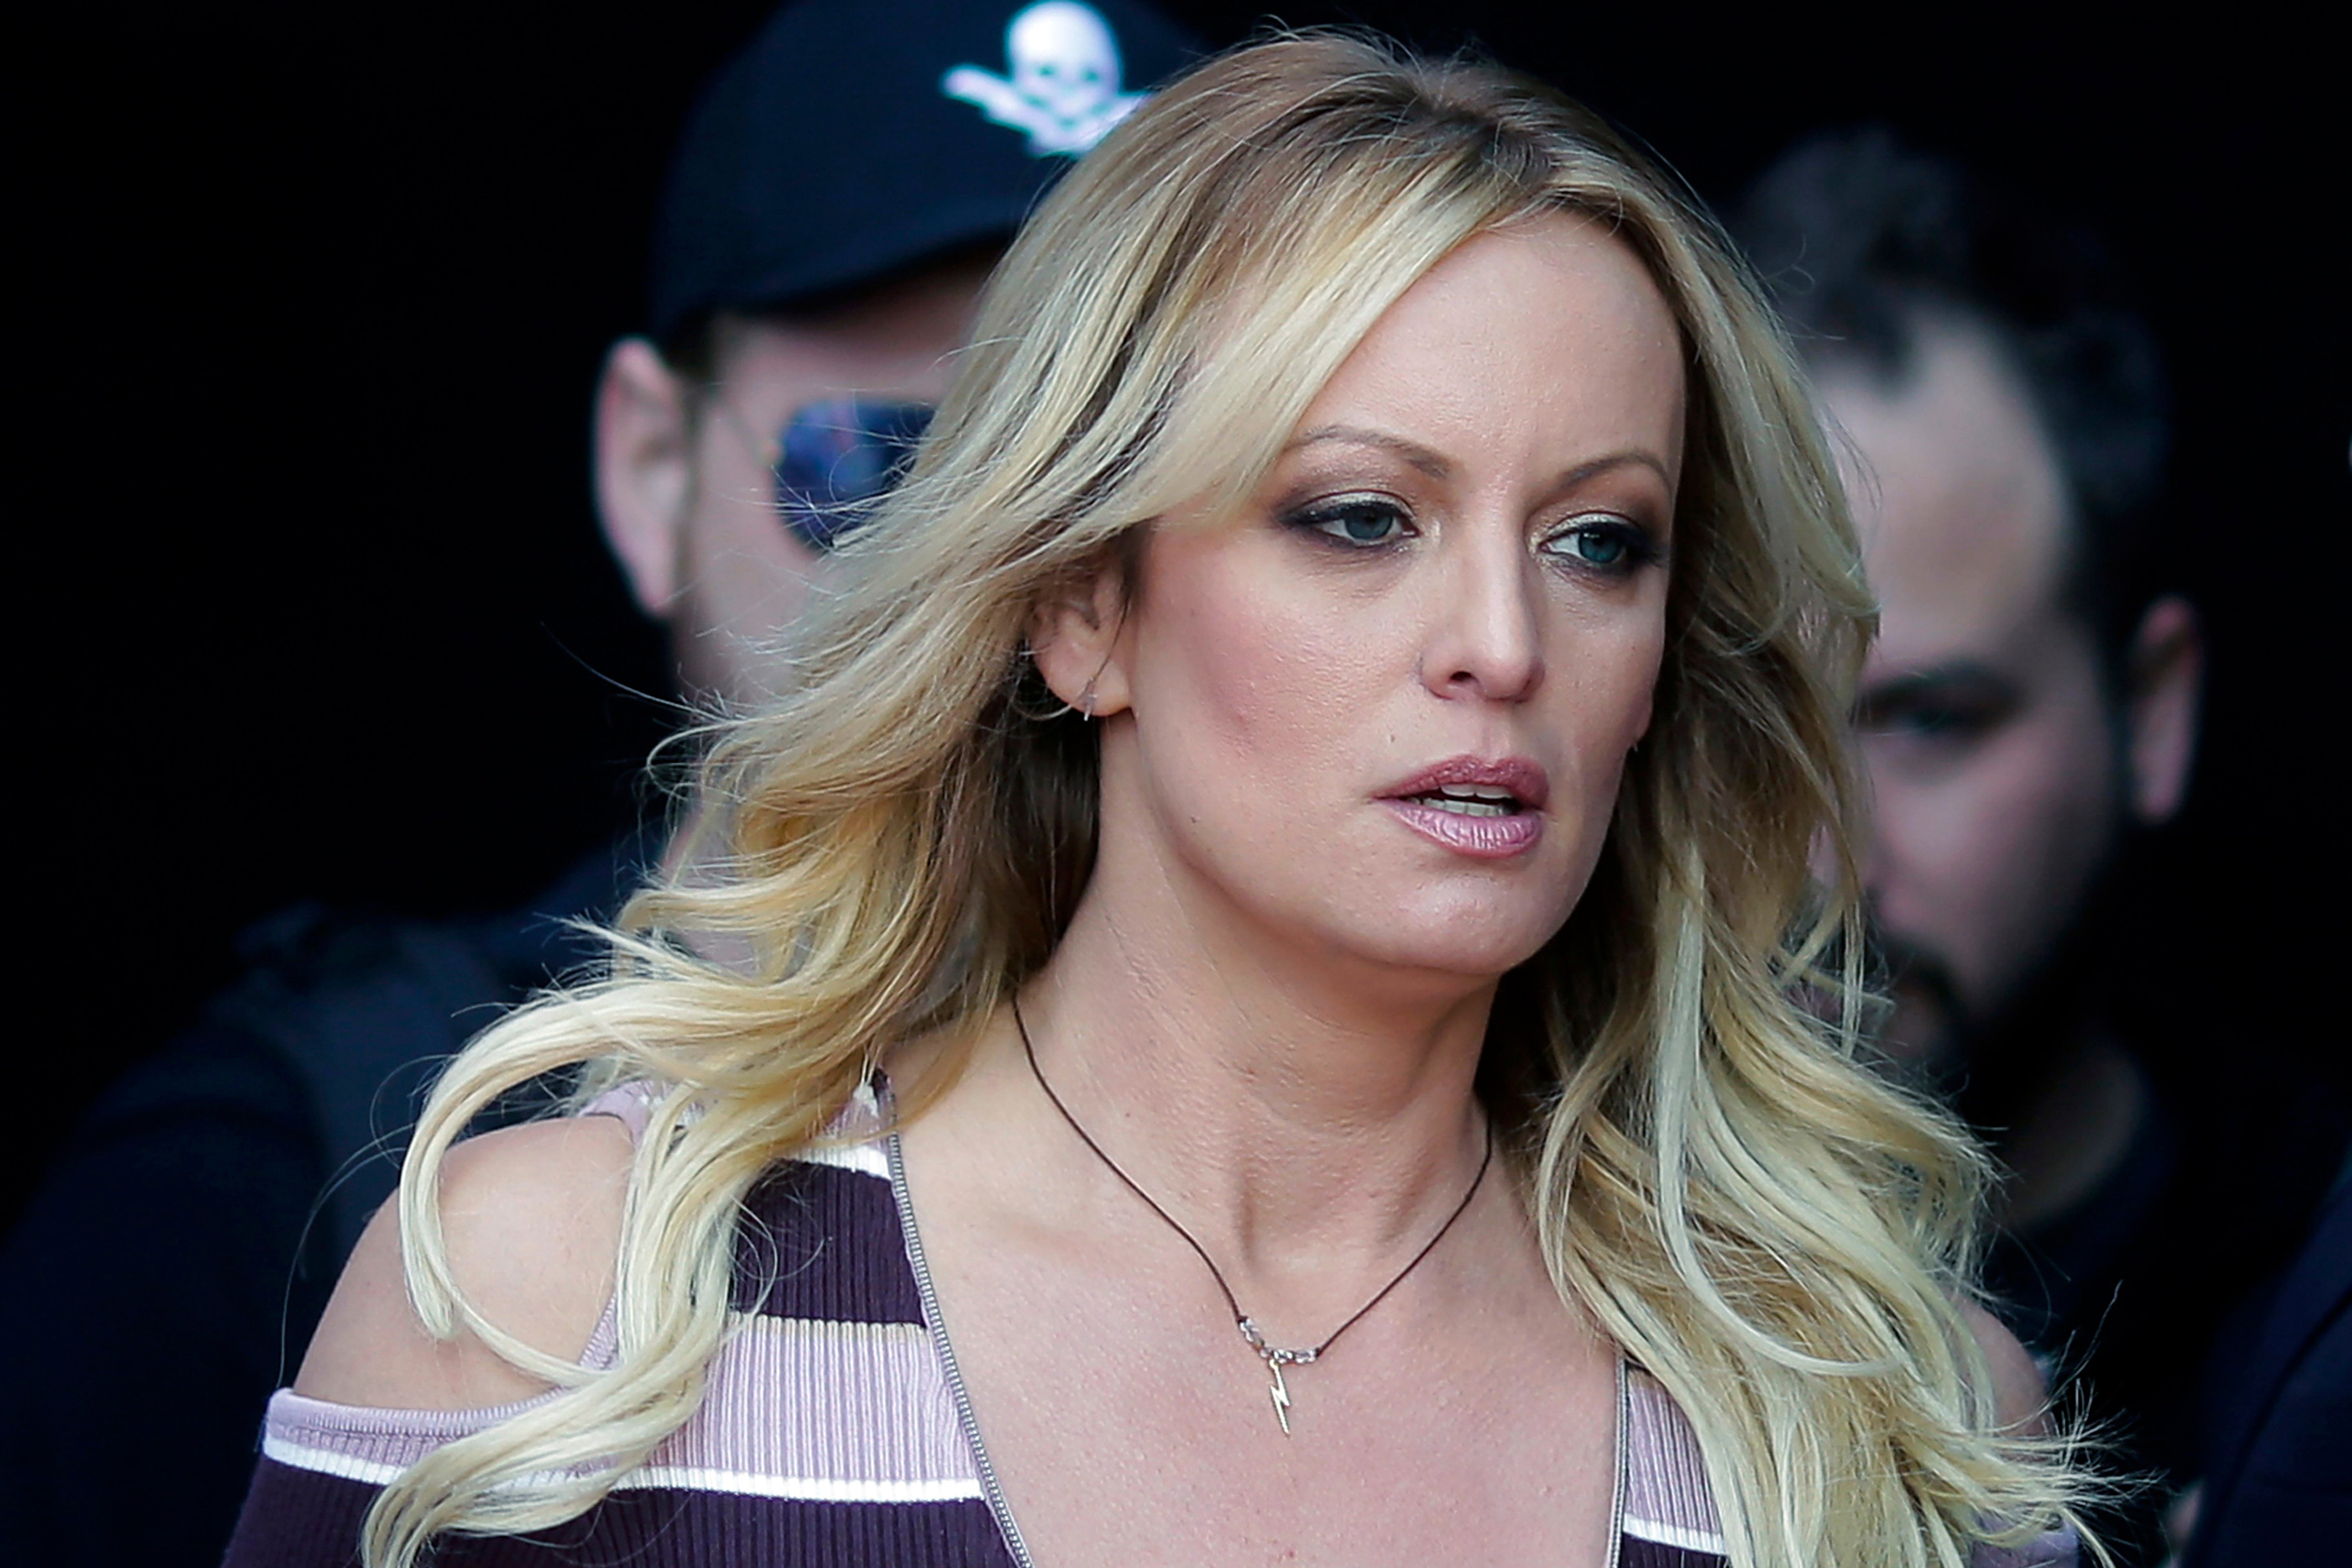 Two female presenters for Fox News have been slammed online for ‘slut-shaming’ adult film actress Stormy Daniels following her testimony in Donald Trump’s New York criminal trial